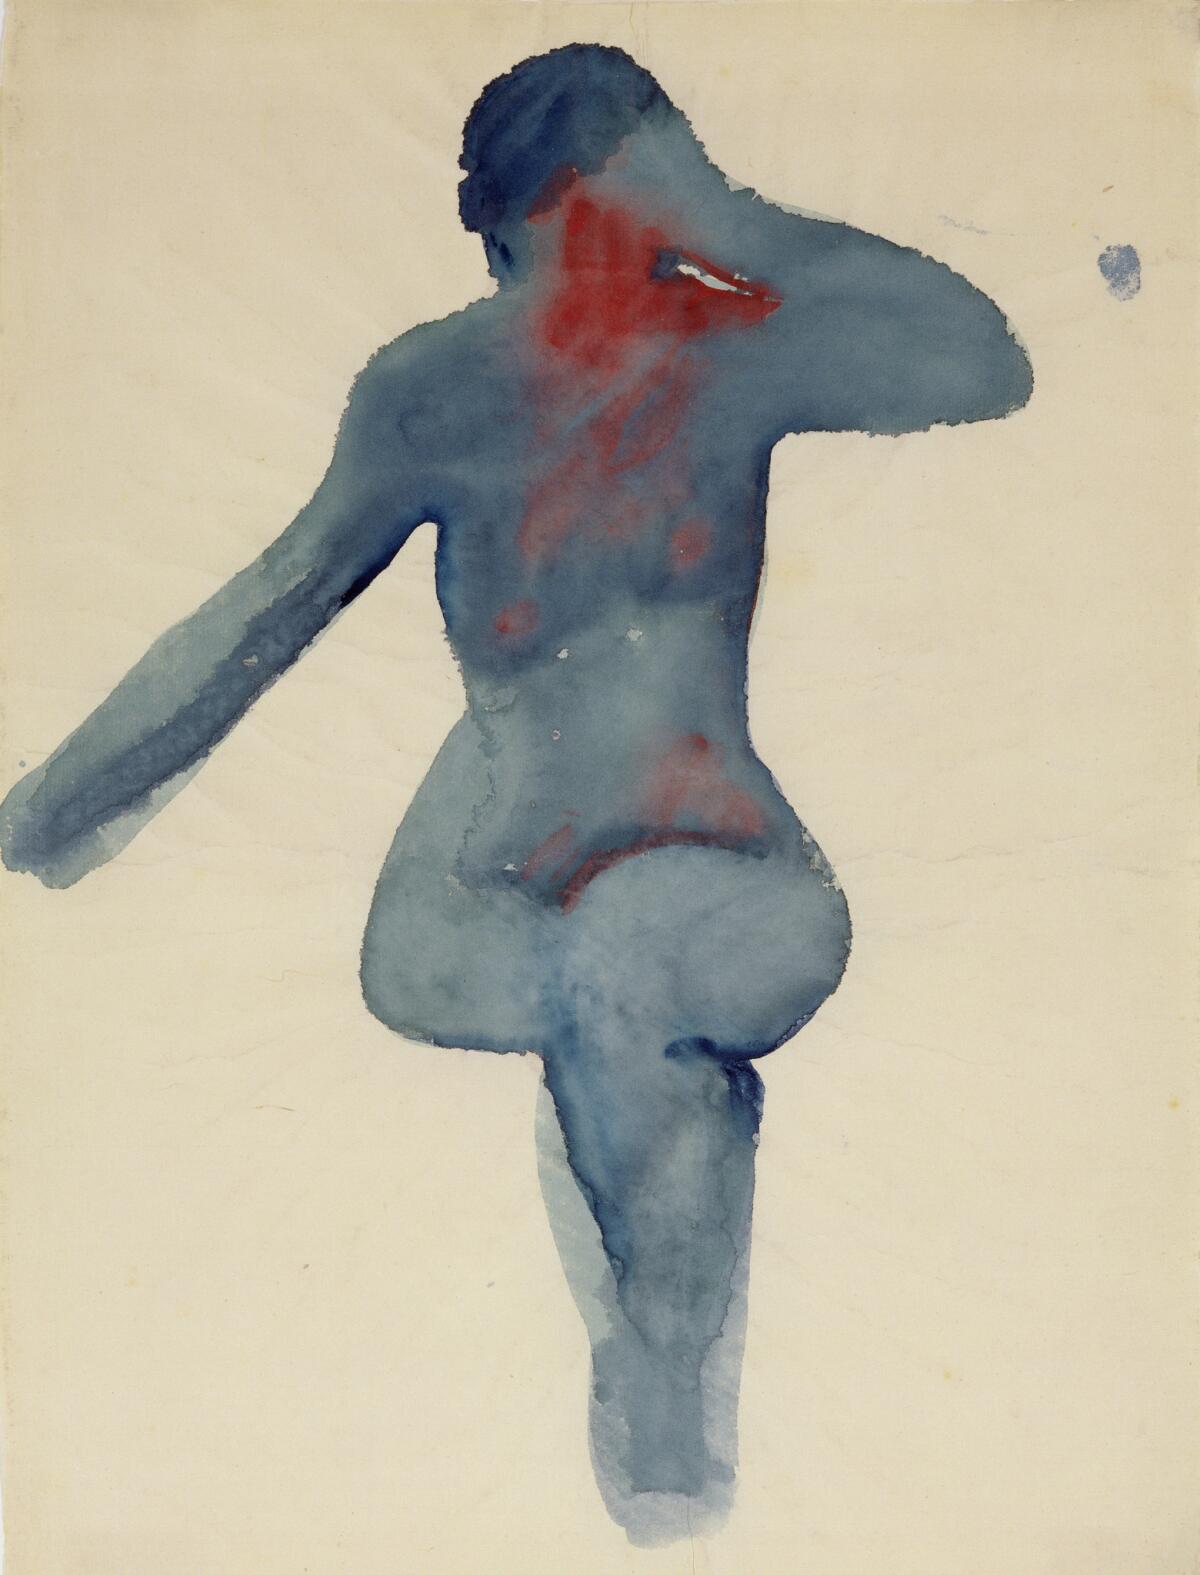 "Nude Series VIII," 1917, watercolor on paper, 18 inches by 13-1/2 inches. Georgia O'Keeffe Museum Gift of the Burnett Foundation and the Georgia O'Keeffe Foundation. (Fire Dragon Color / Georgia O Keeffe Museum)